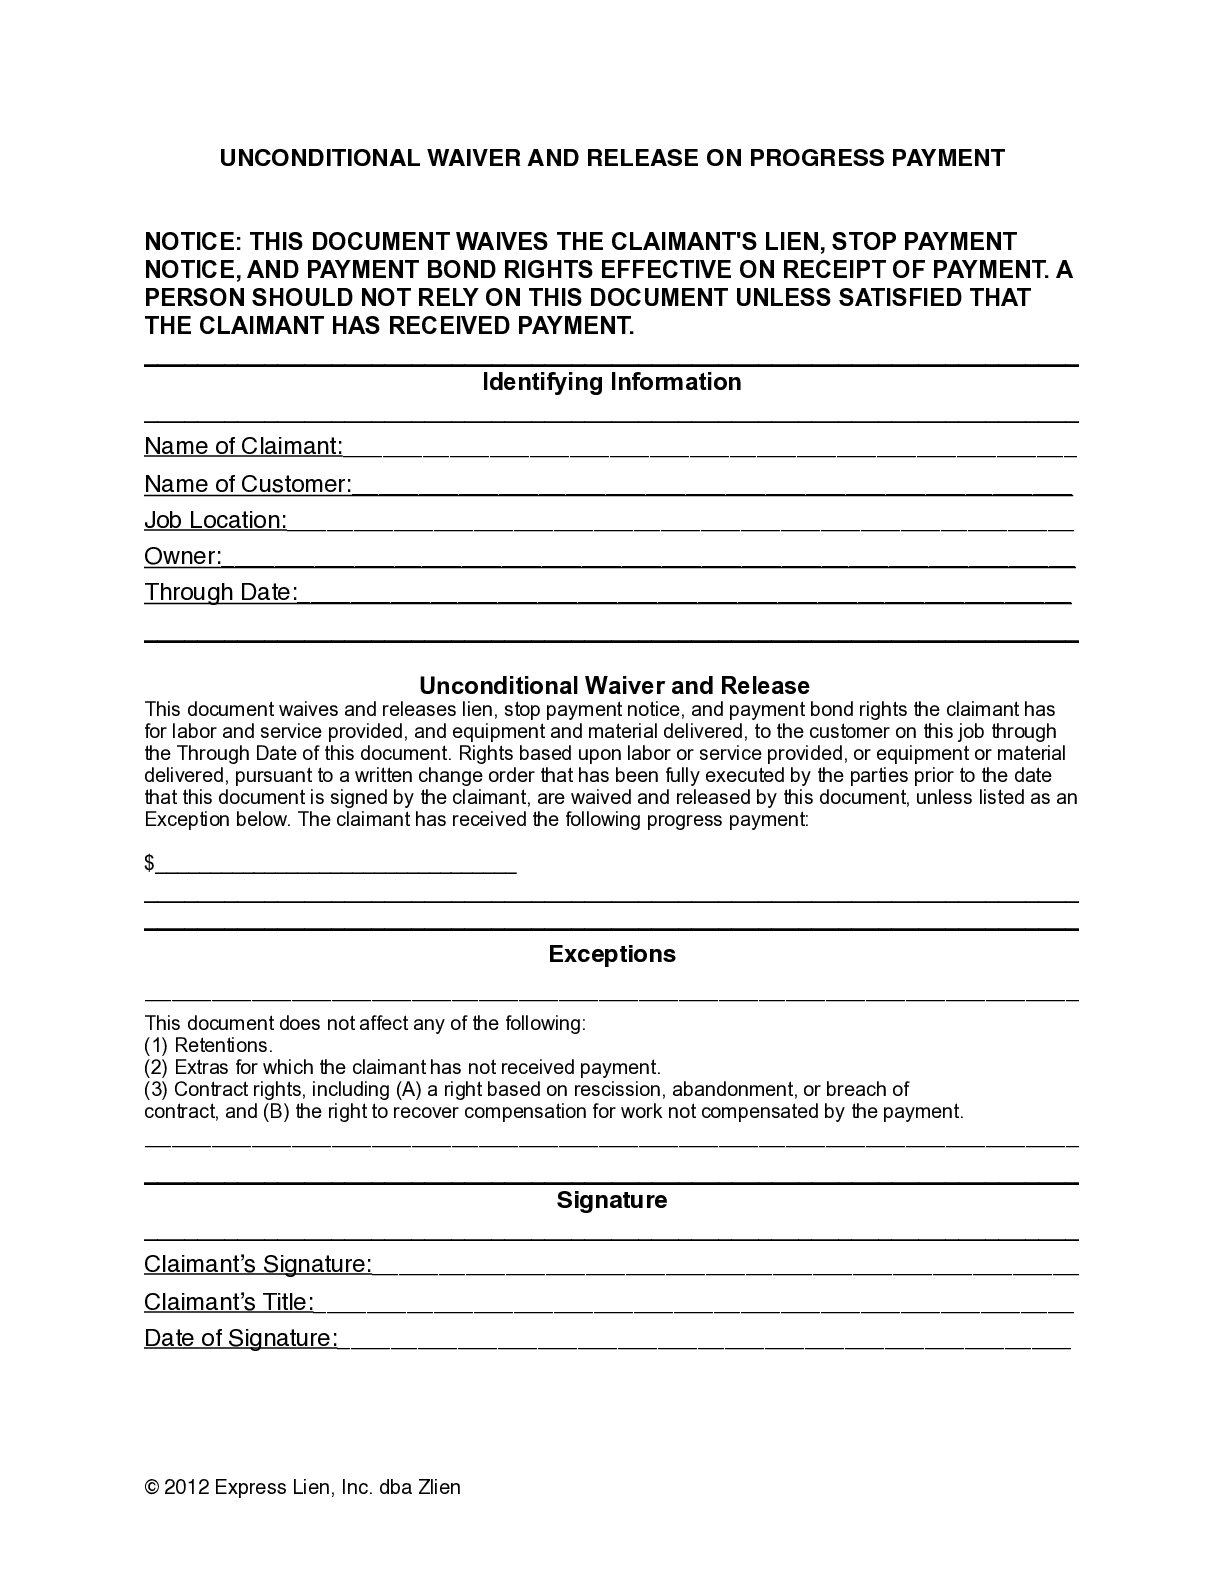 Maryland Partial Unconditional Lien Waiver Form - free from